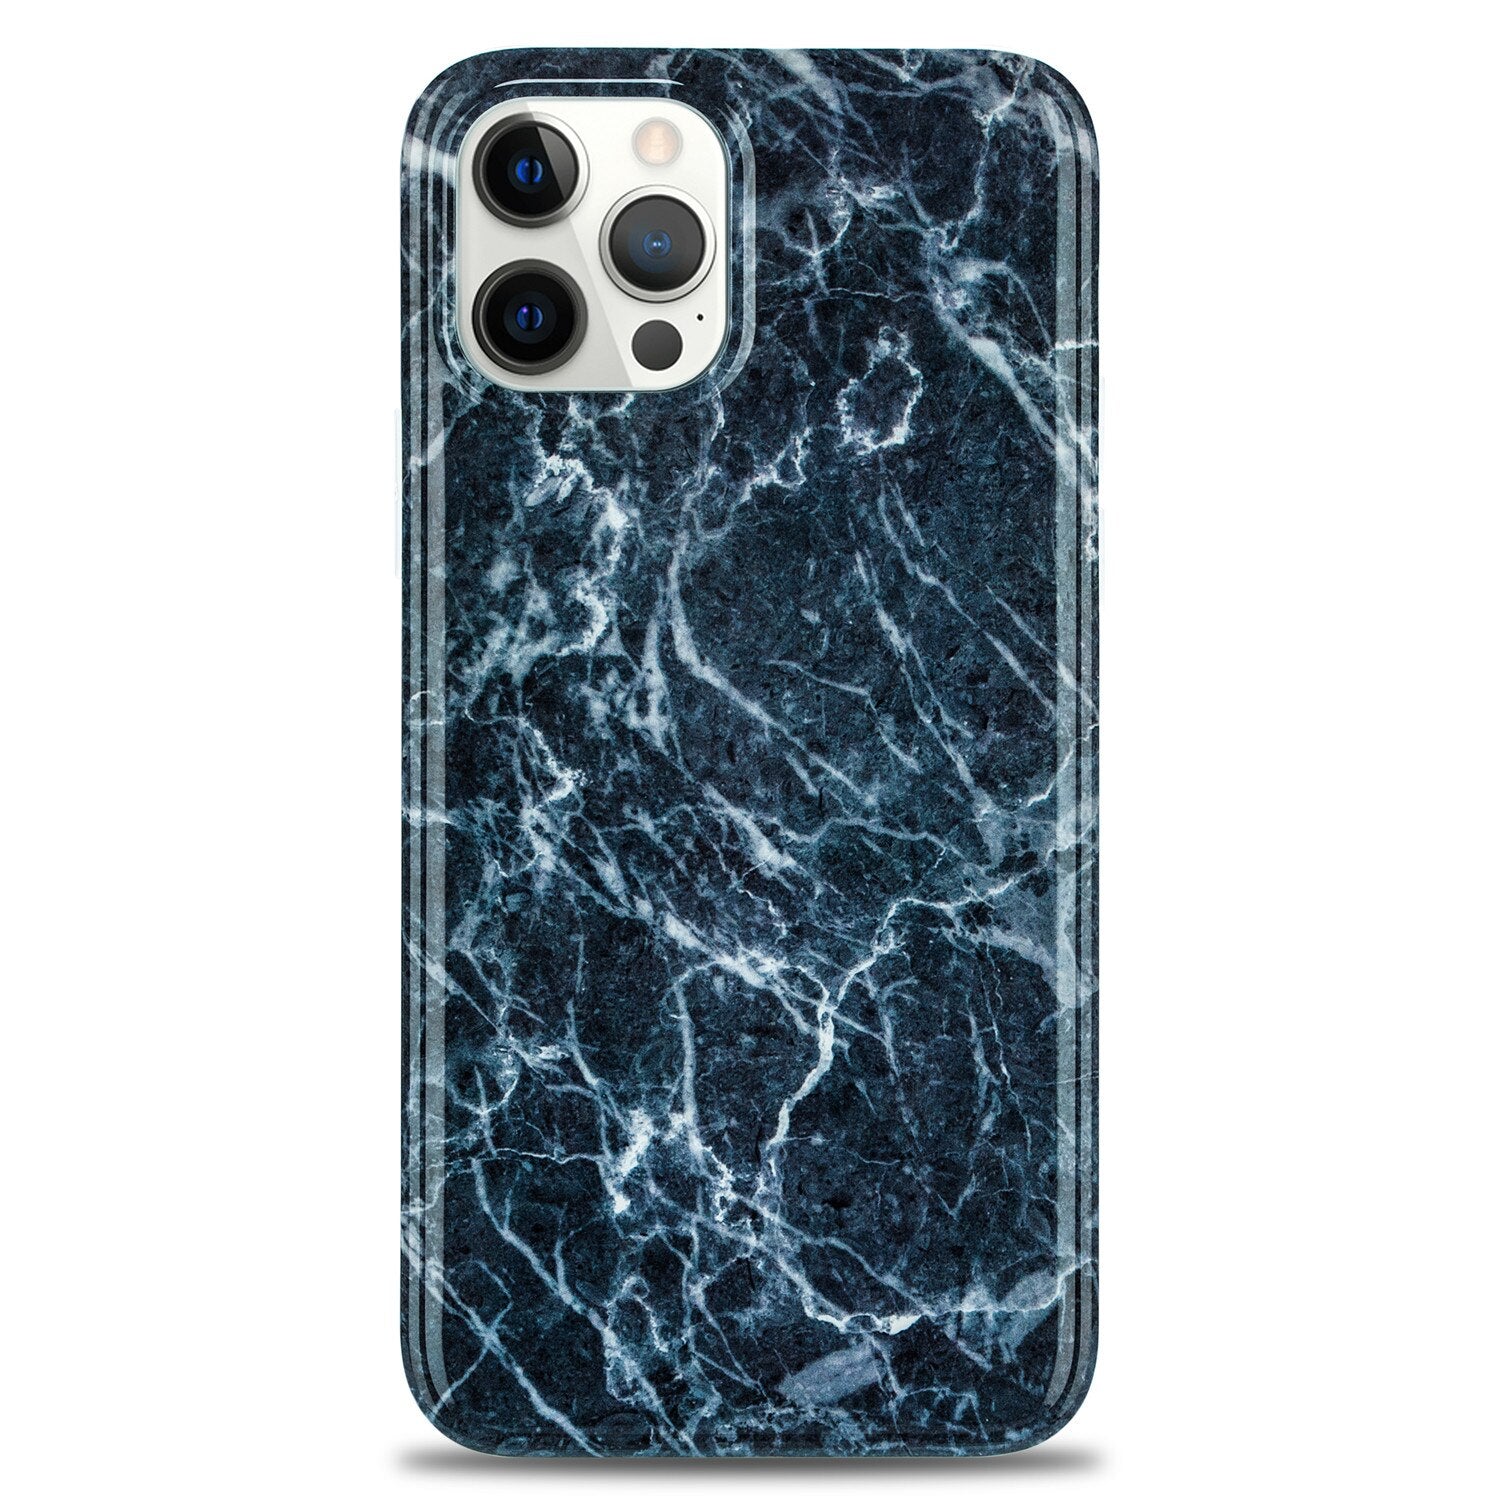 For iPhone 12 Pro Max/iPhone 12 Pro Marble Case, Slim Thin Glossy Soft TPU Rubber Gel Phone Case Cover for iPhone 12 Mini - 380230 for iPhone 12 / Dark Gray / United States Find Epic Store